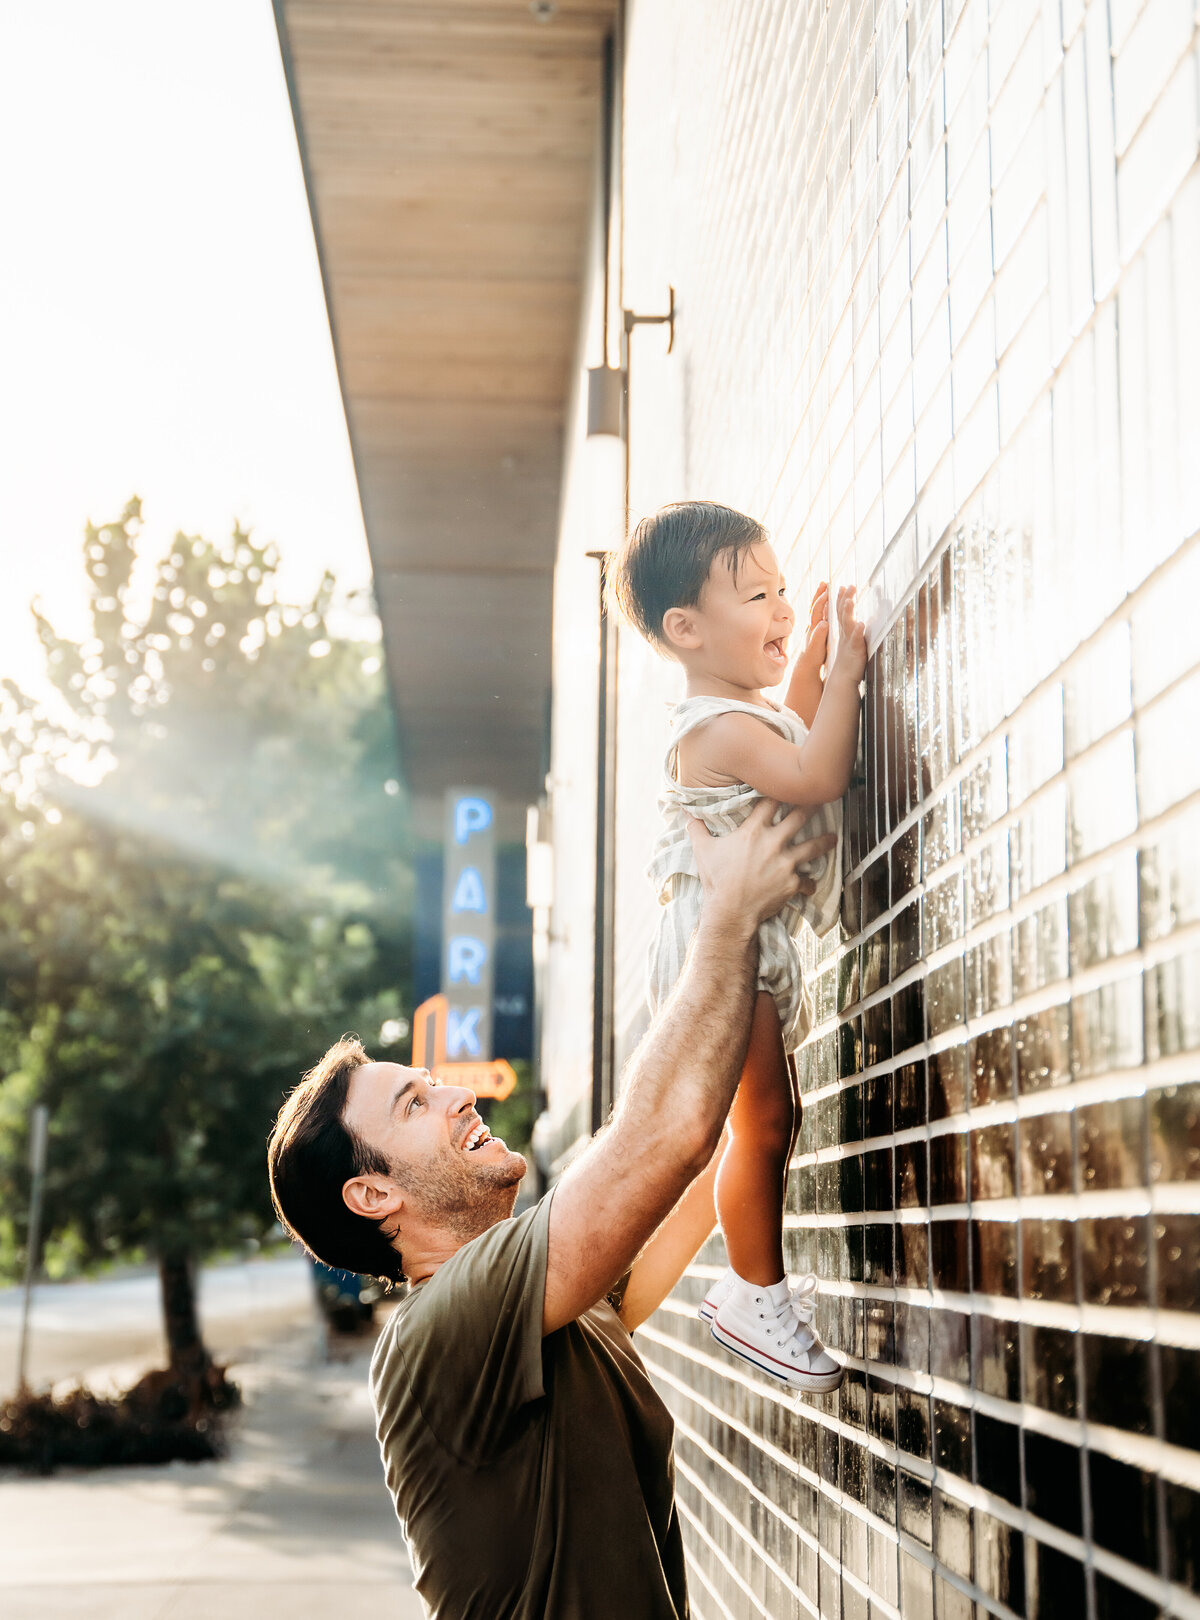 Family Photographer, dad lifts baby boy up to examine a tiled wall outside, both laugh